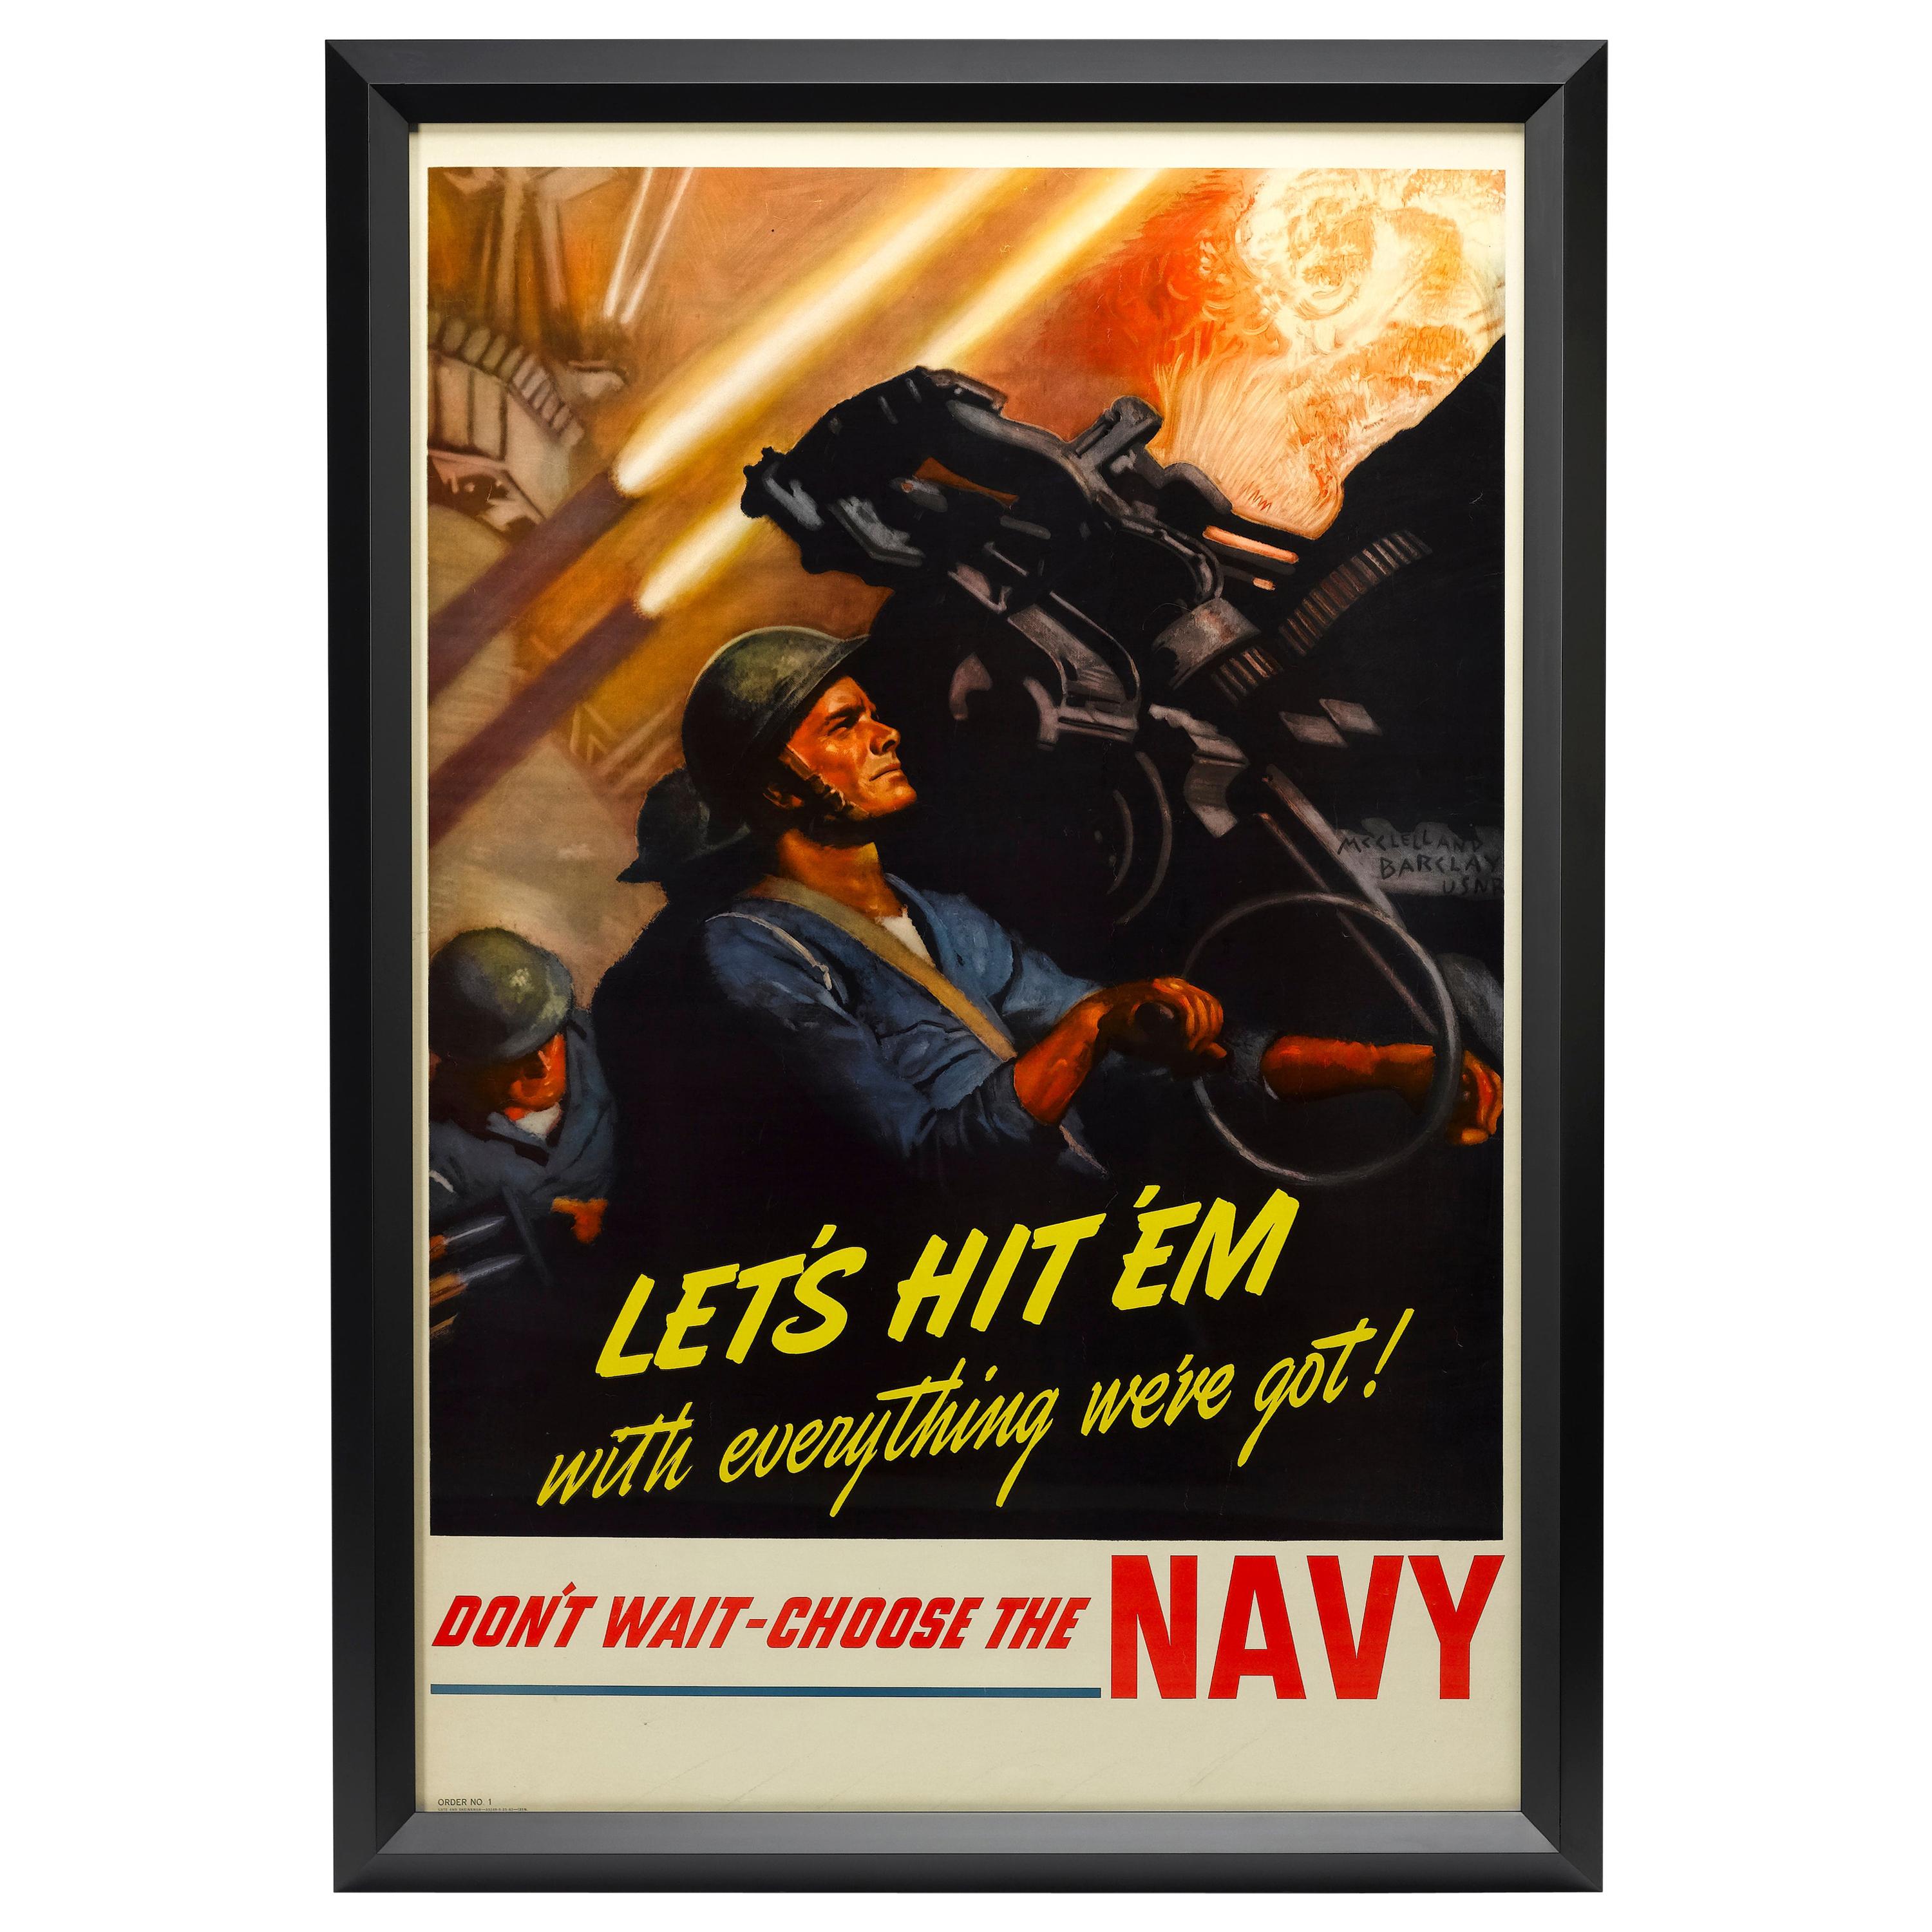 Vintage WWII Navy Recruitment Poster by McClelland Barclay, circa 1942